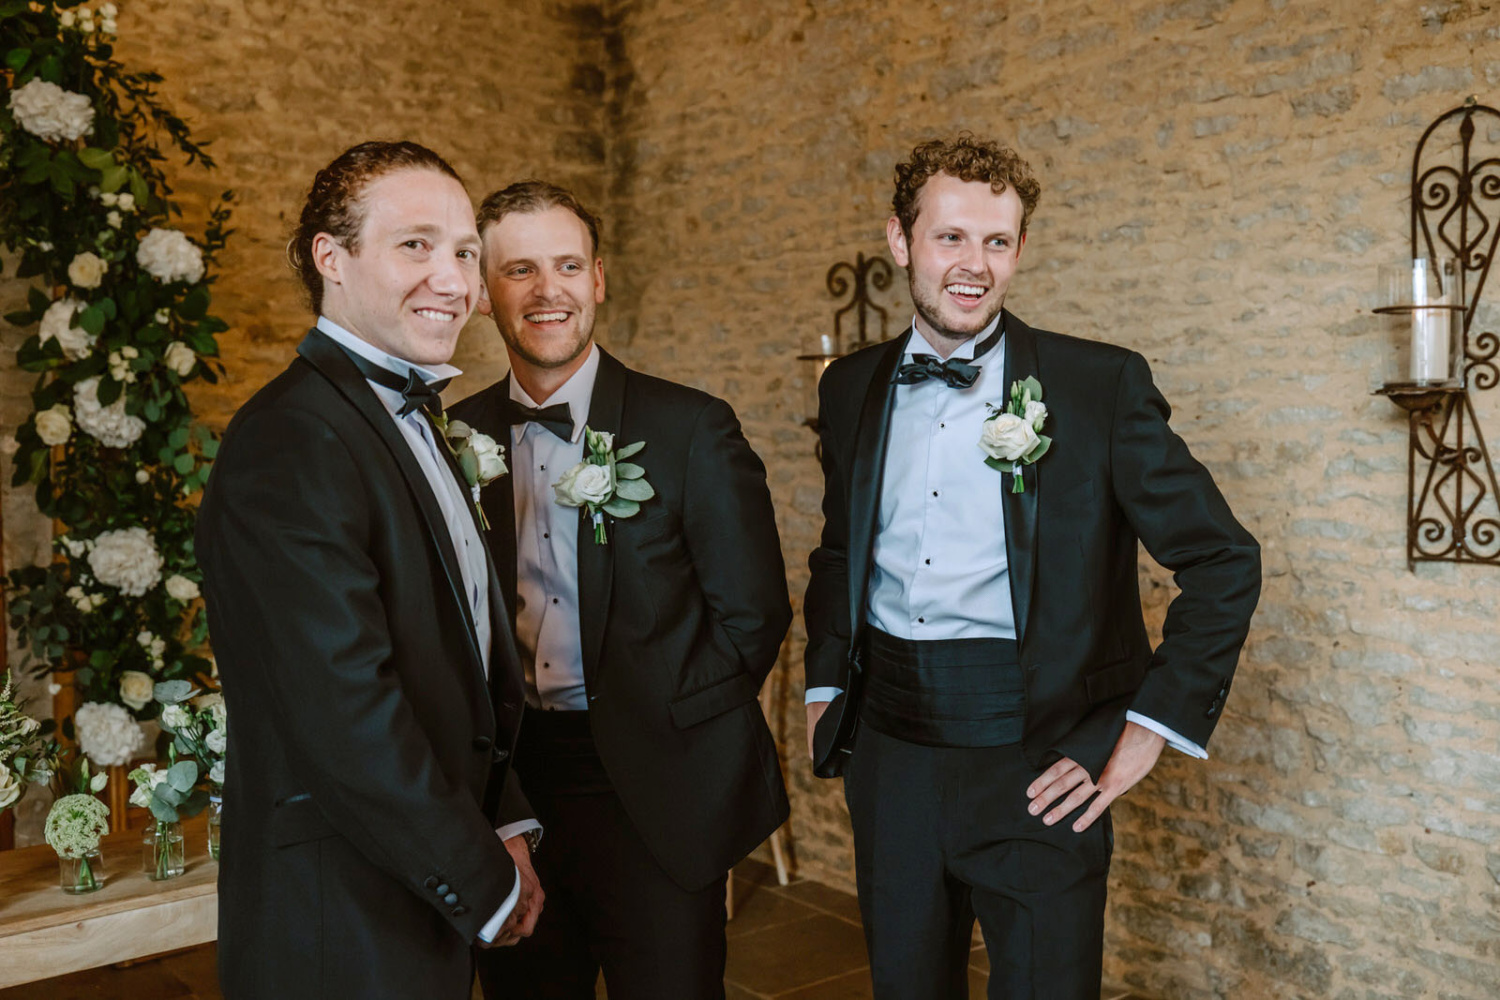 Three groomsmen in tuxedos standing next to each other.